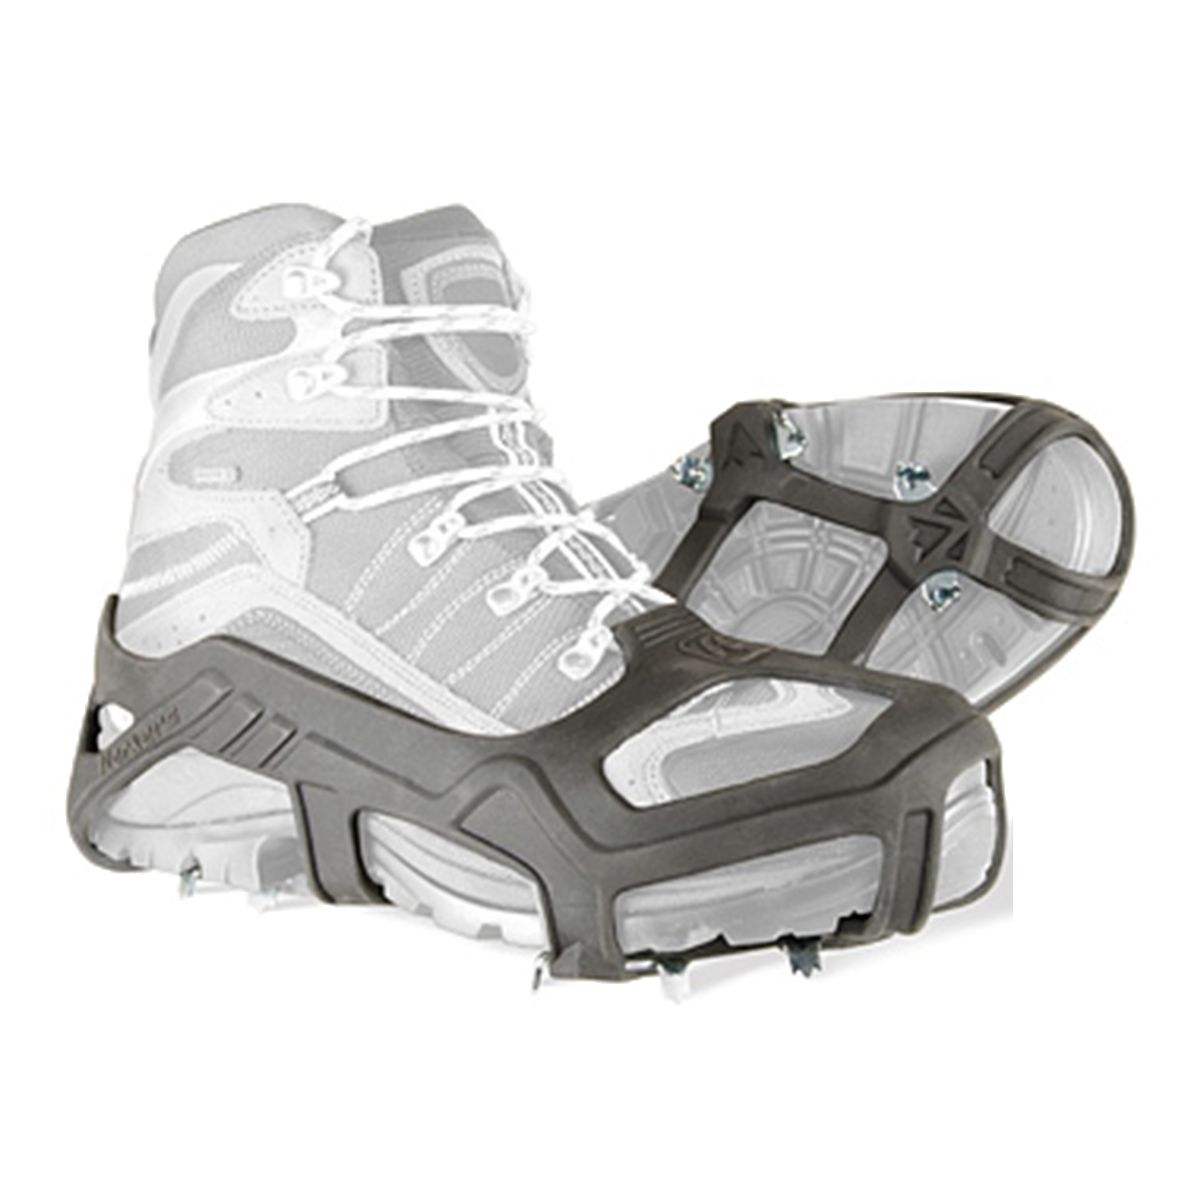 Image of Korkers Apex Ice Cleats